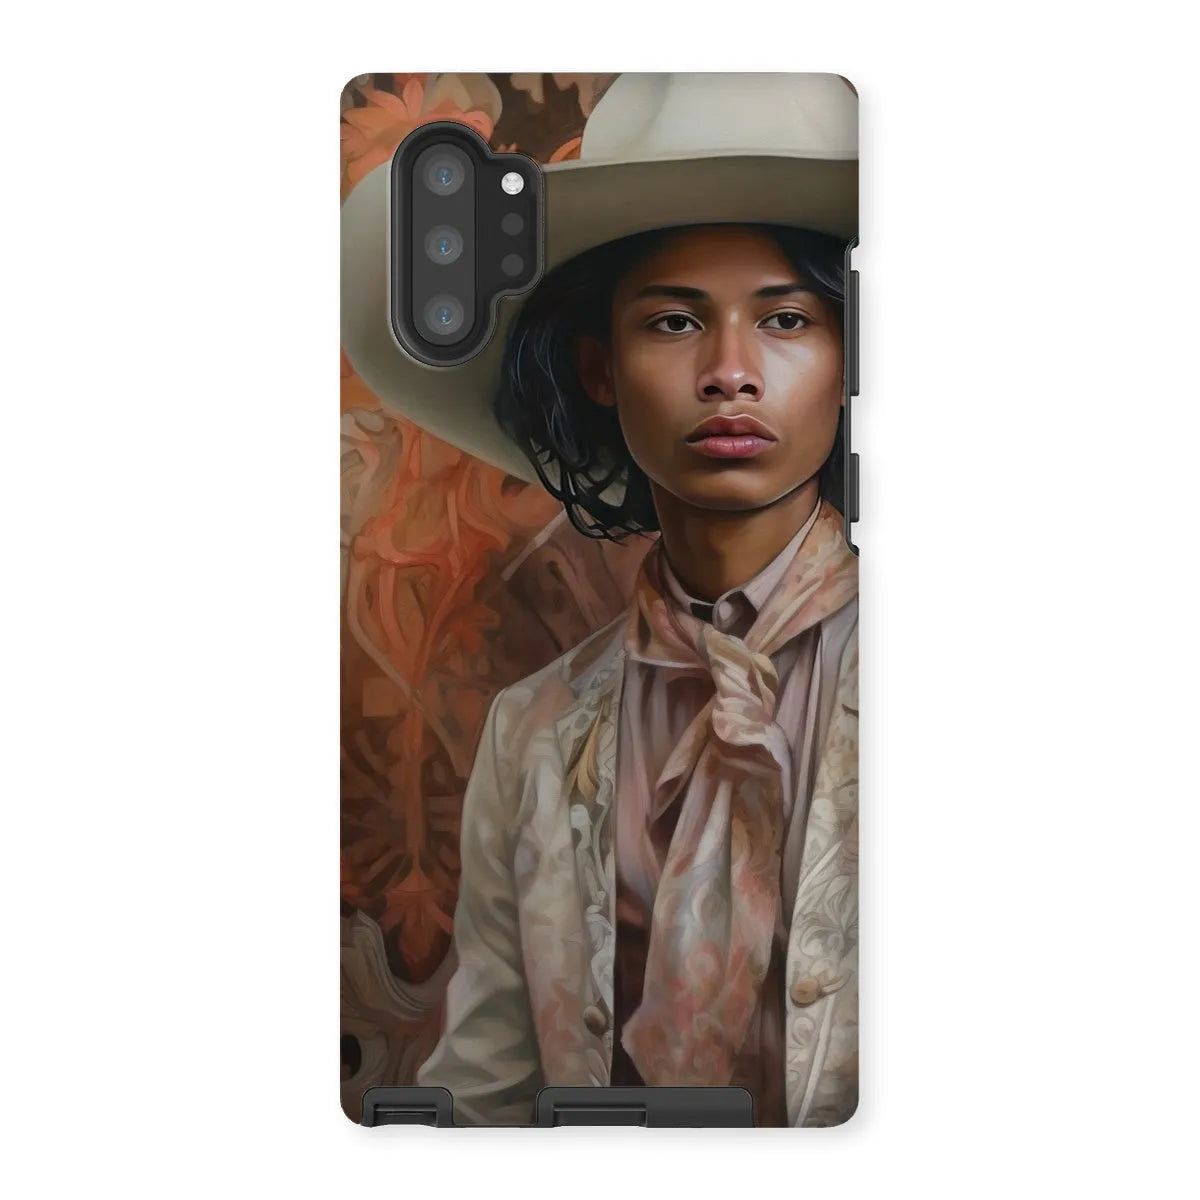 Arjuna The Gay Cowboy - Gay Aesthetic Art Phone Case - Samsung Galaxy Note 10p / Matte - Mobile Phone Cases - Aesthetic